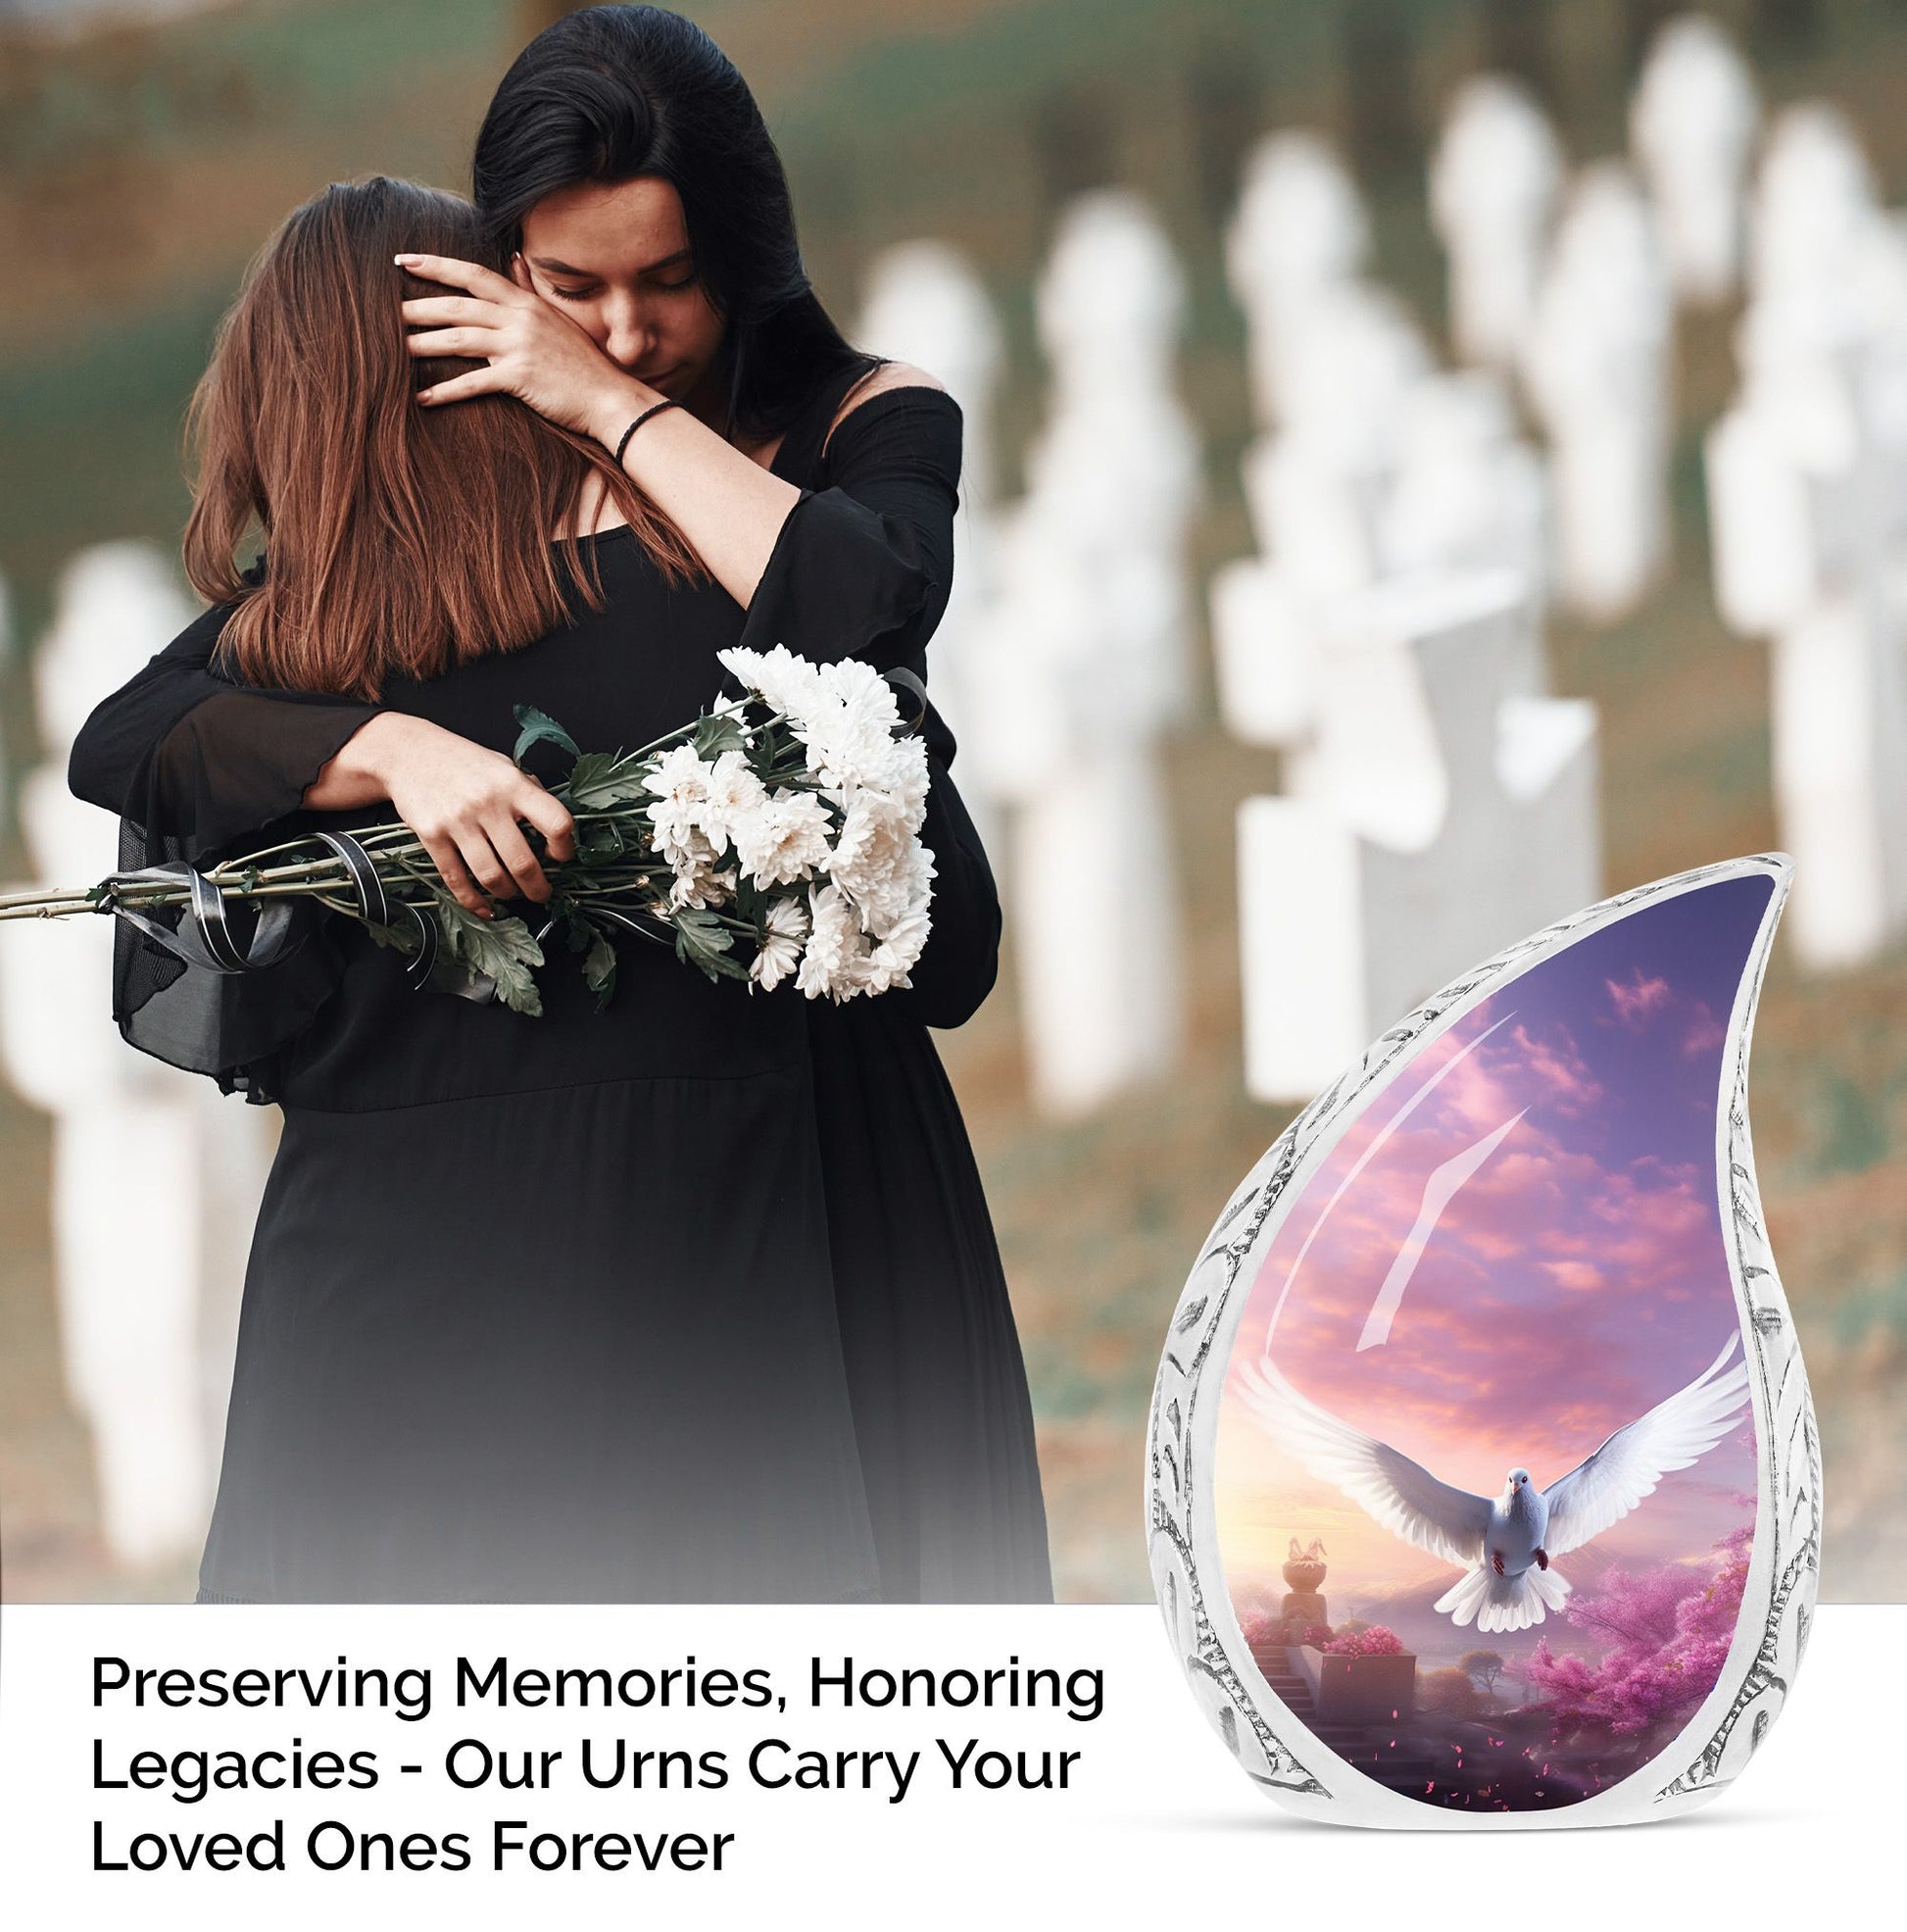 Large Dove and Cherry Blossom-themed Urn for adults, useful for cremation and as a memorial for ashes